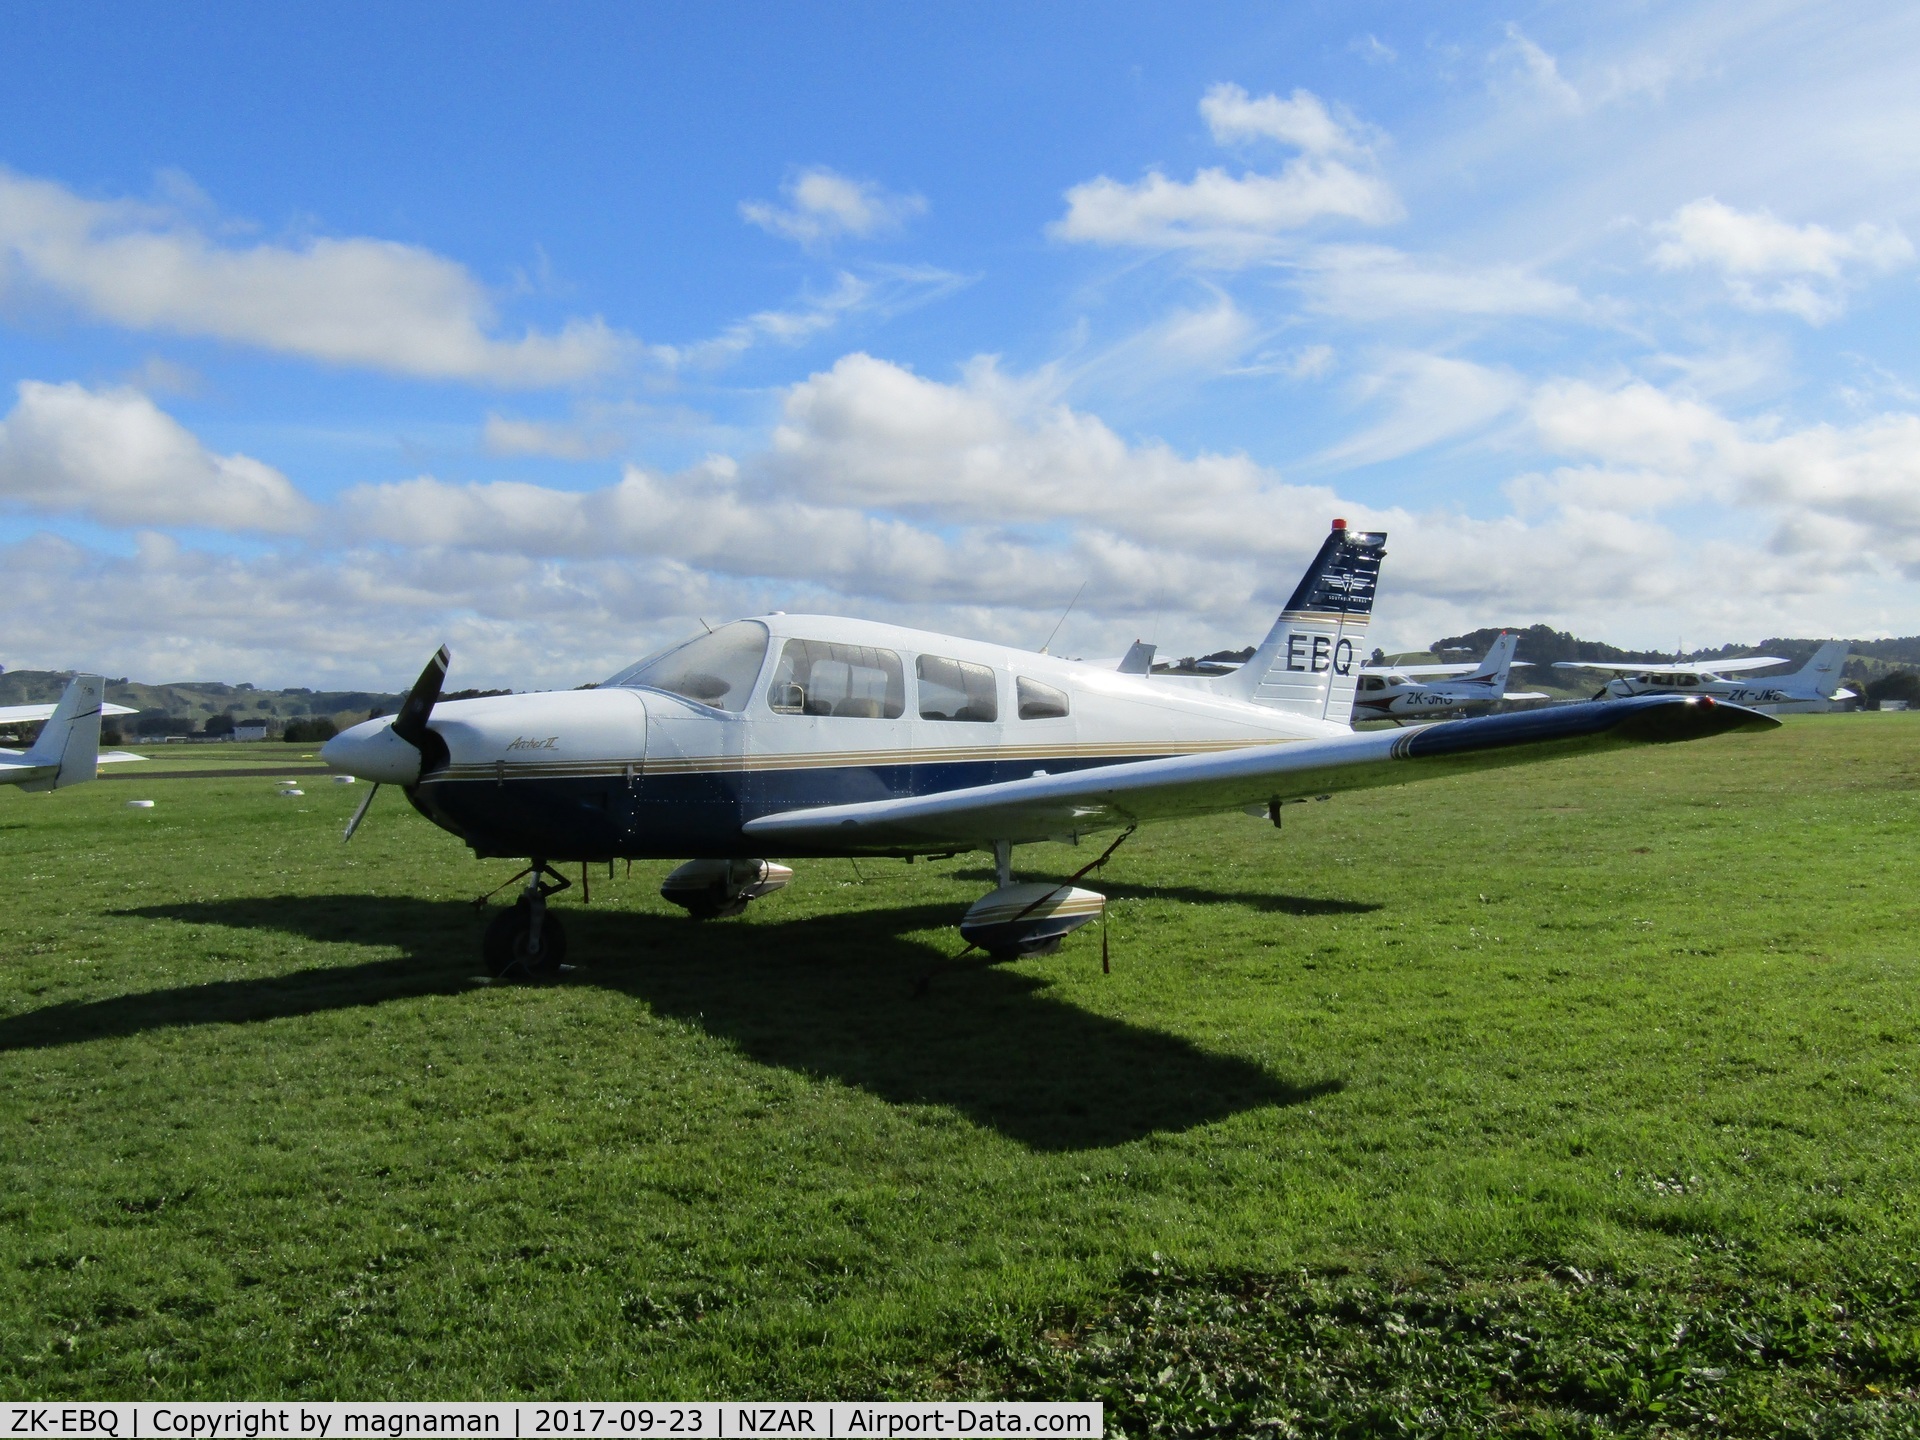 ZK-EBQ, Piper PA-28-181 C/N 28-7690458, at ardmore - new to me!